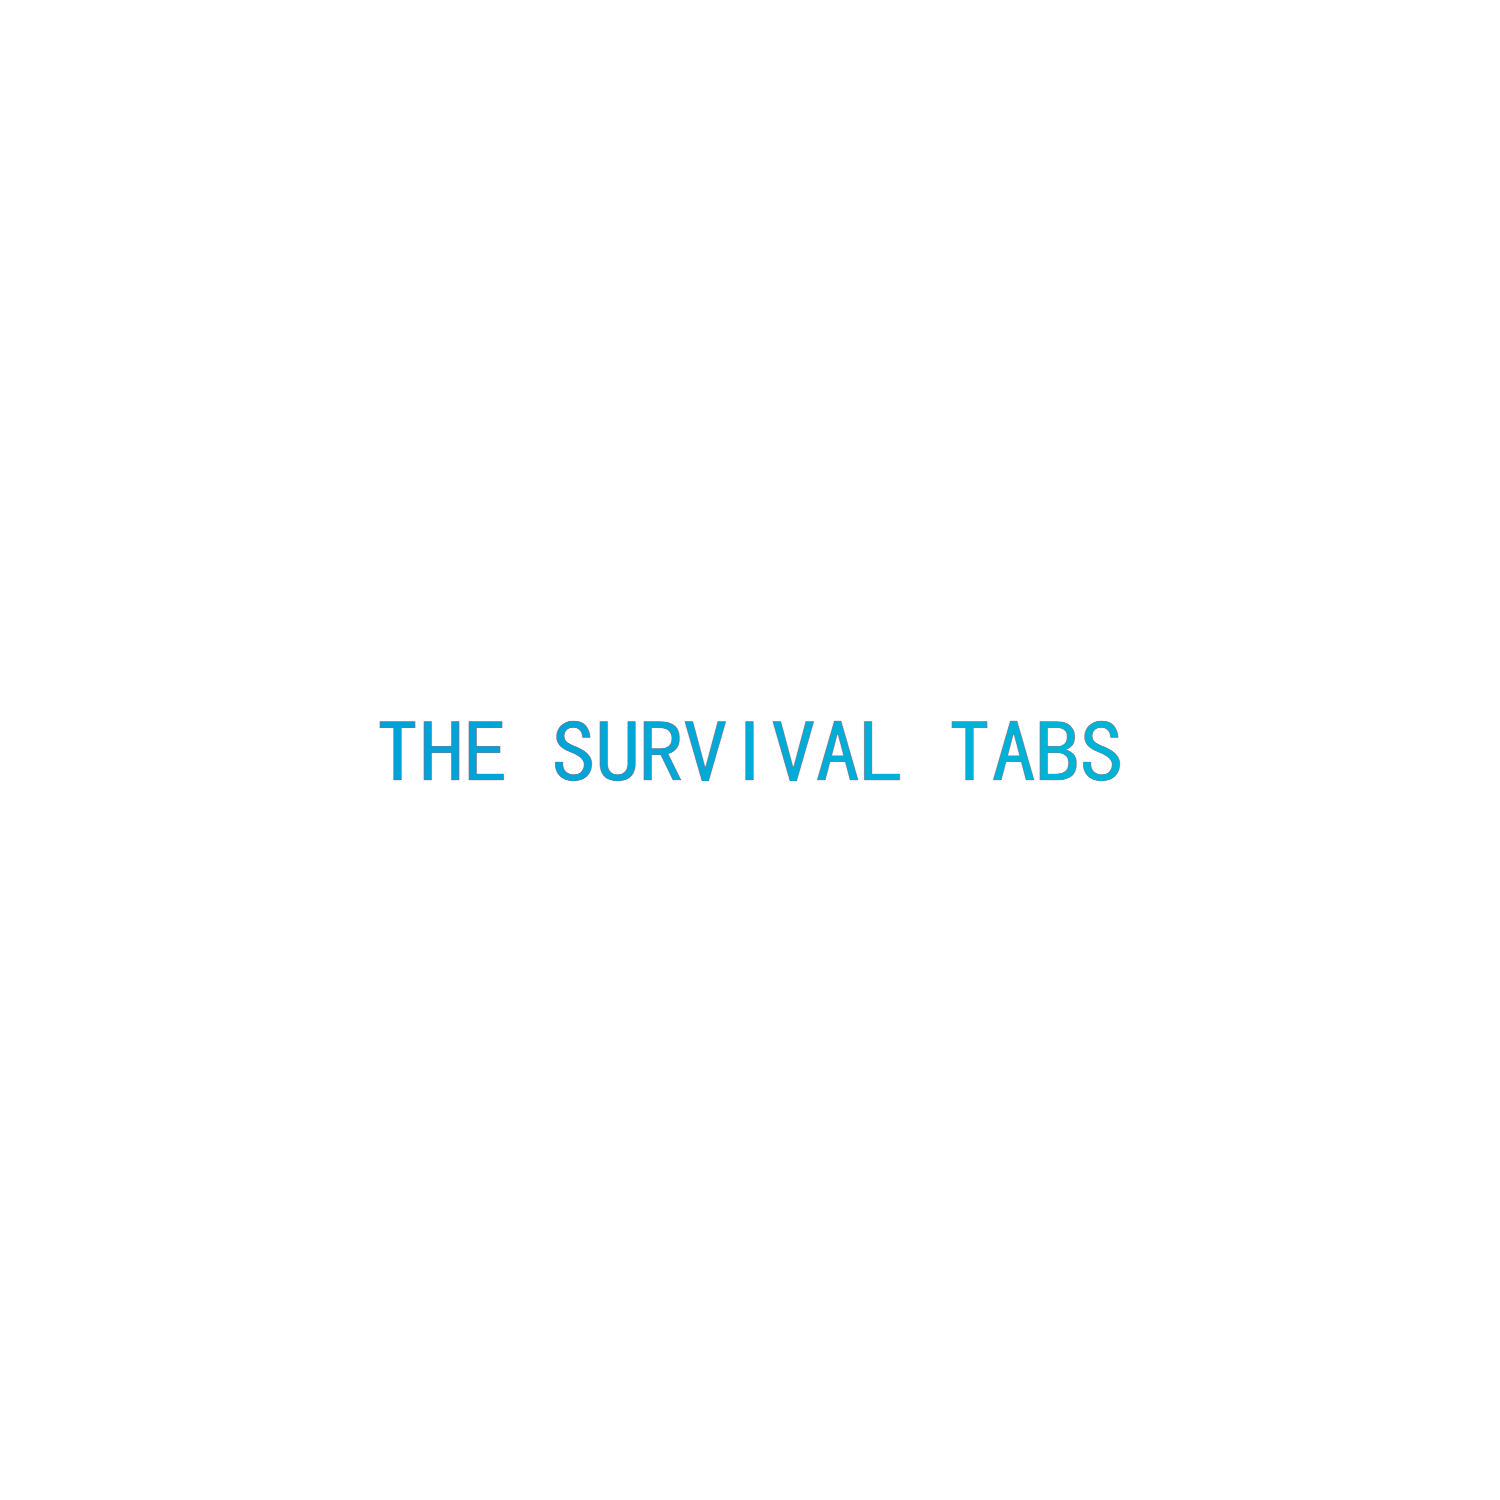 THE SURVIVAL TABS